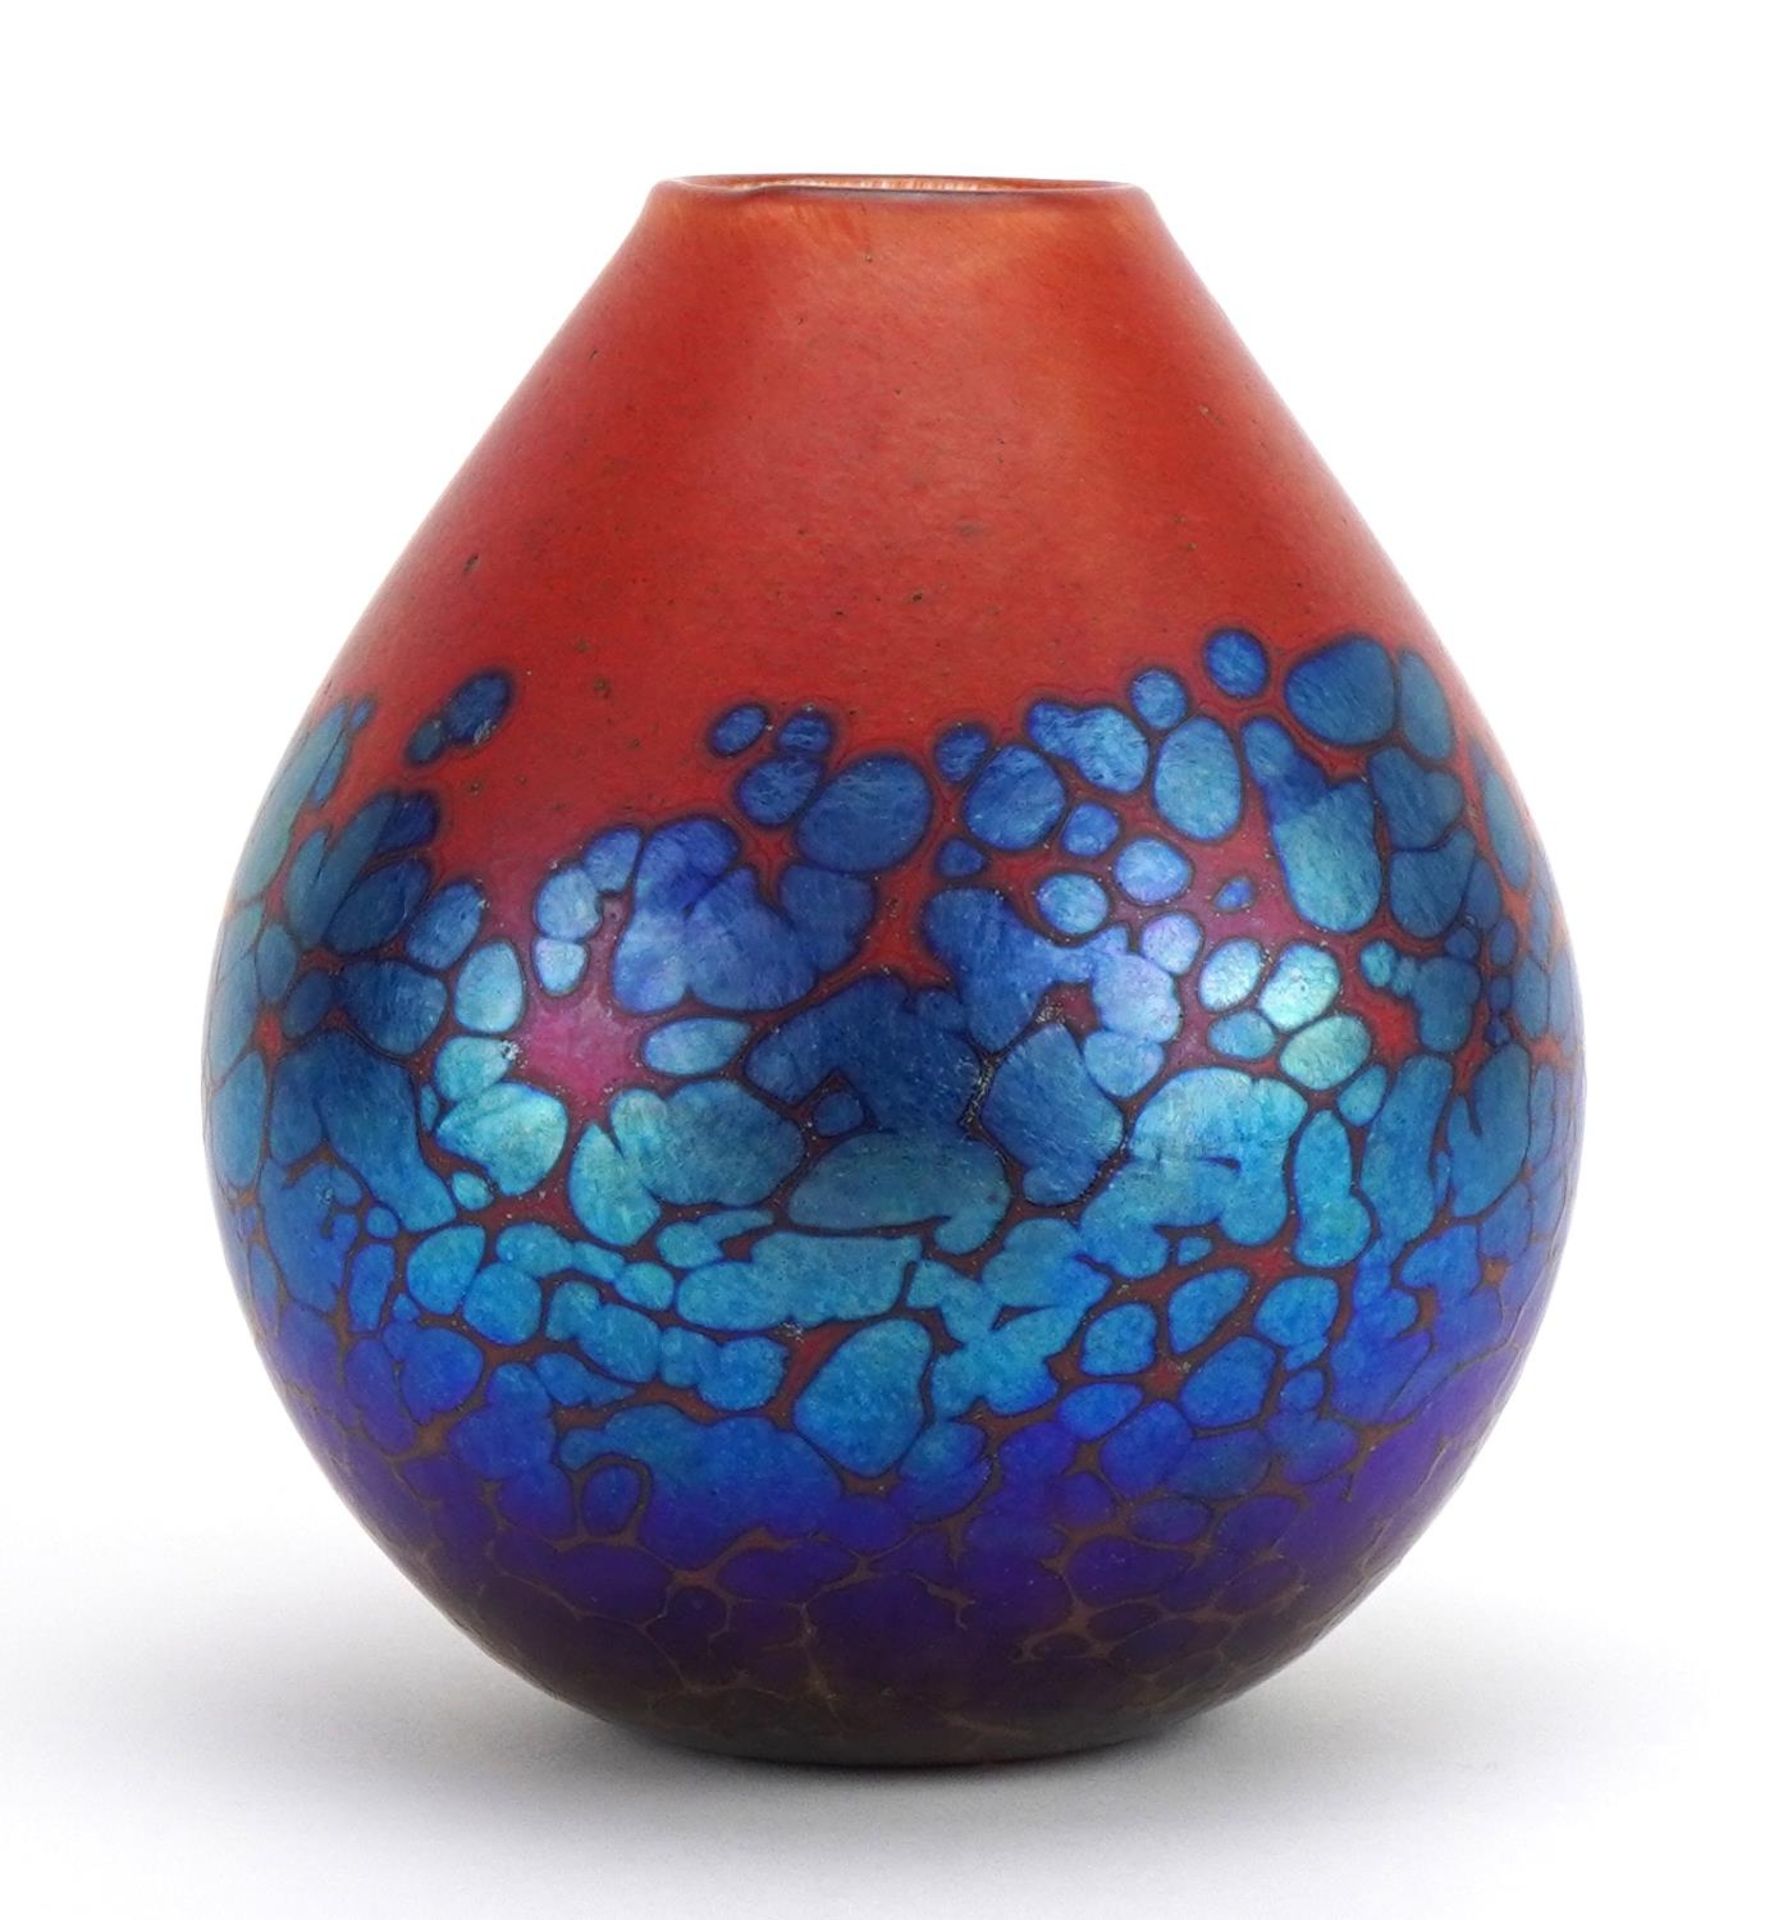 Siddy Langley, iridescent art glass vase with red, etched Siddy Langley 1998 to the base, 16.5cm